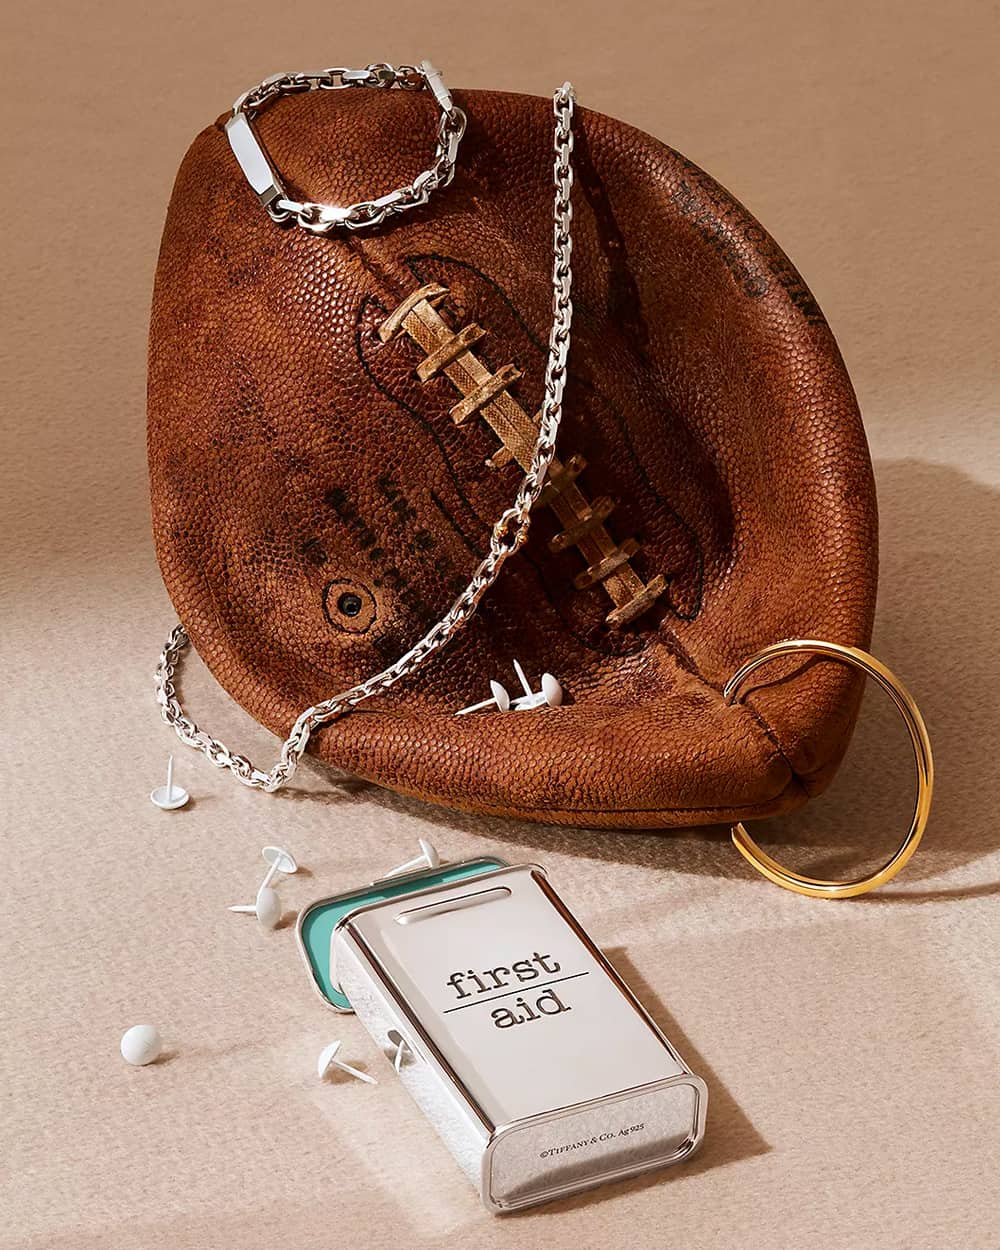 Men's Tiffany & Co. silver and gold jewellery on an American football